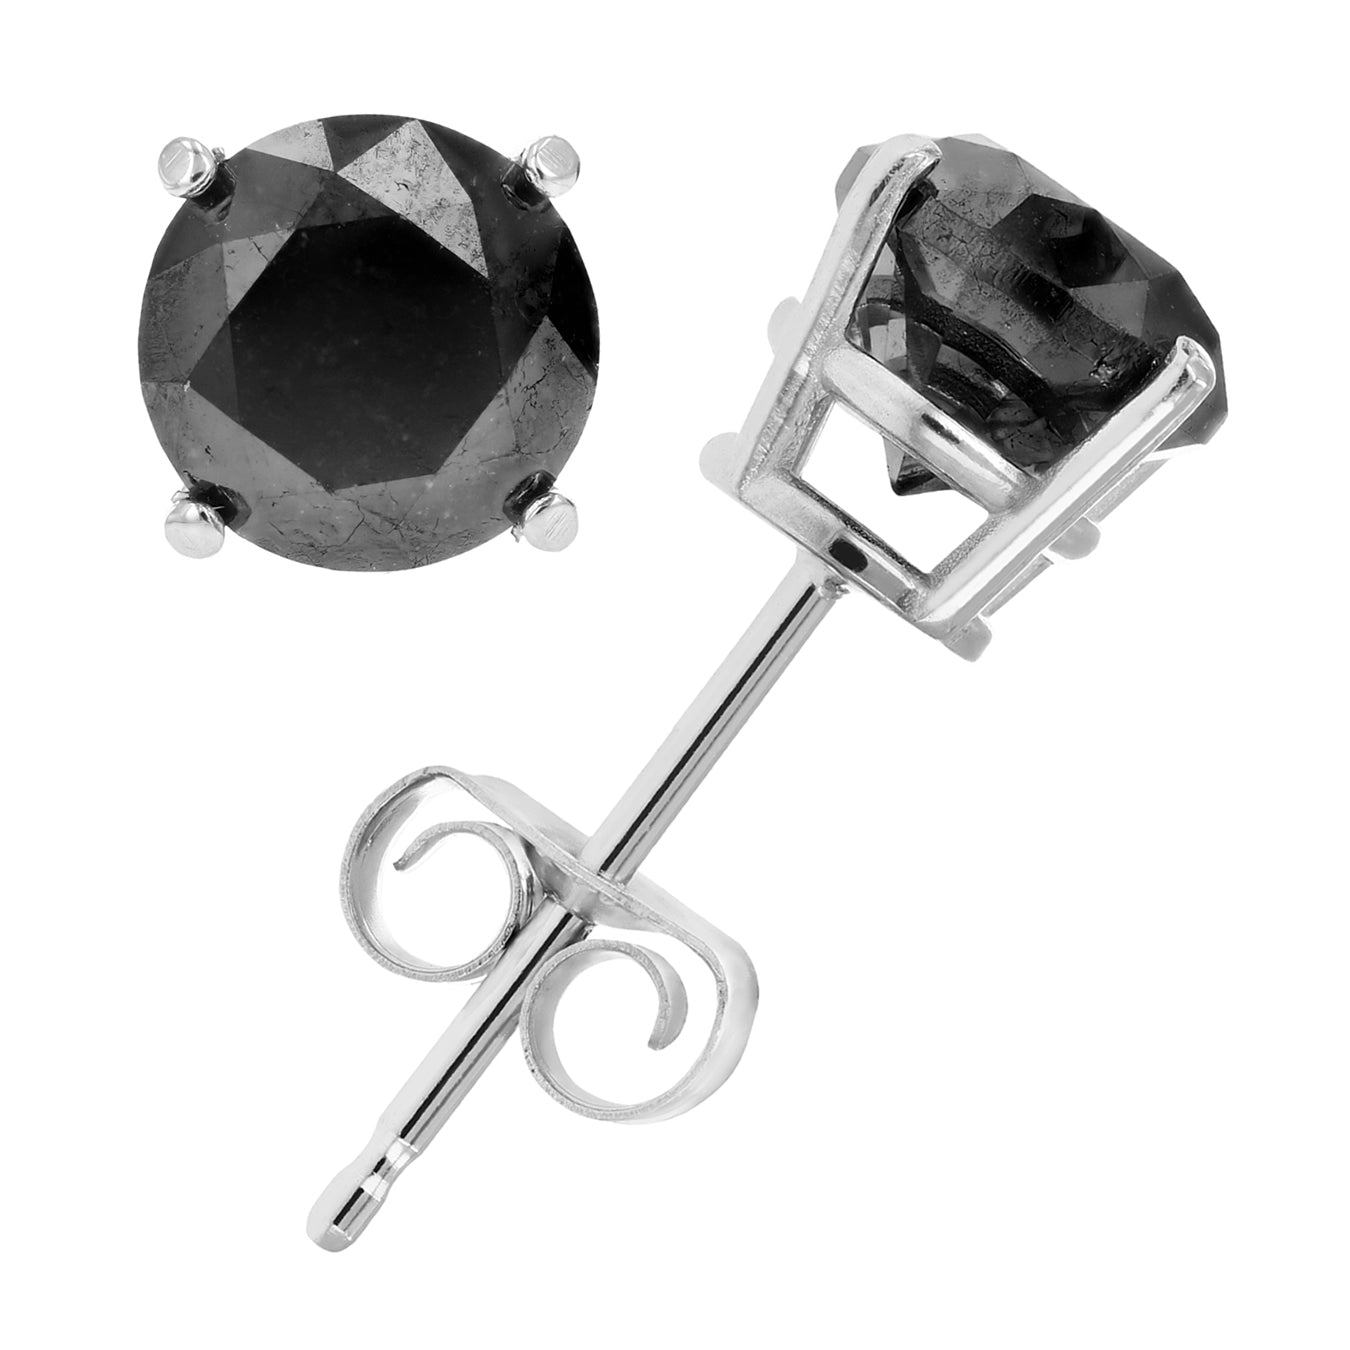 2 cttw Black Diamond Stud Earrings .925 Sterling Silver Round with Push Backs